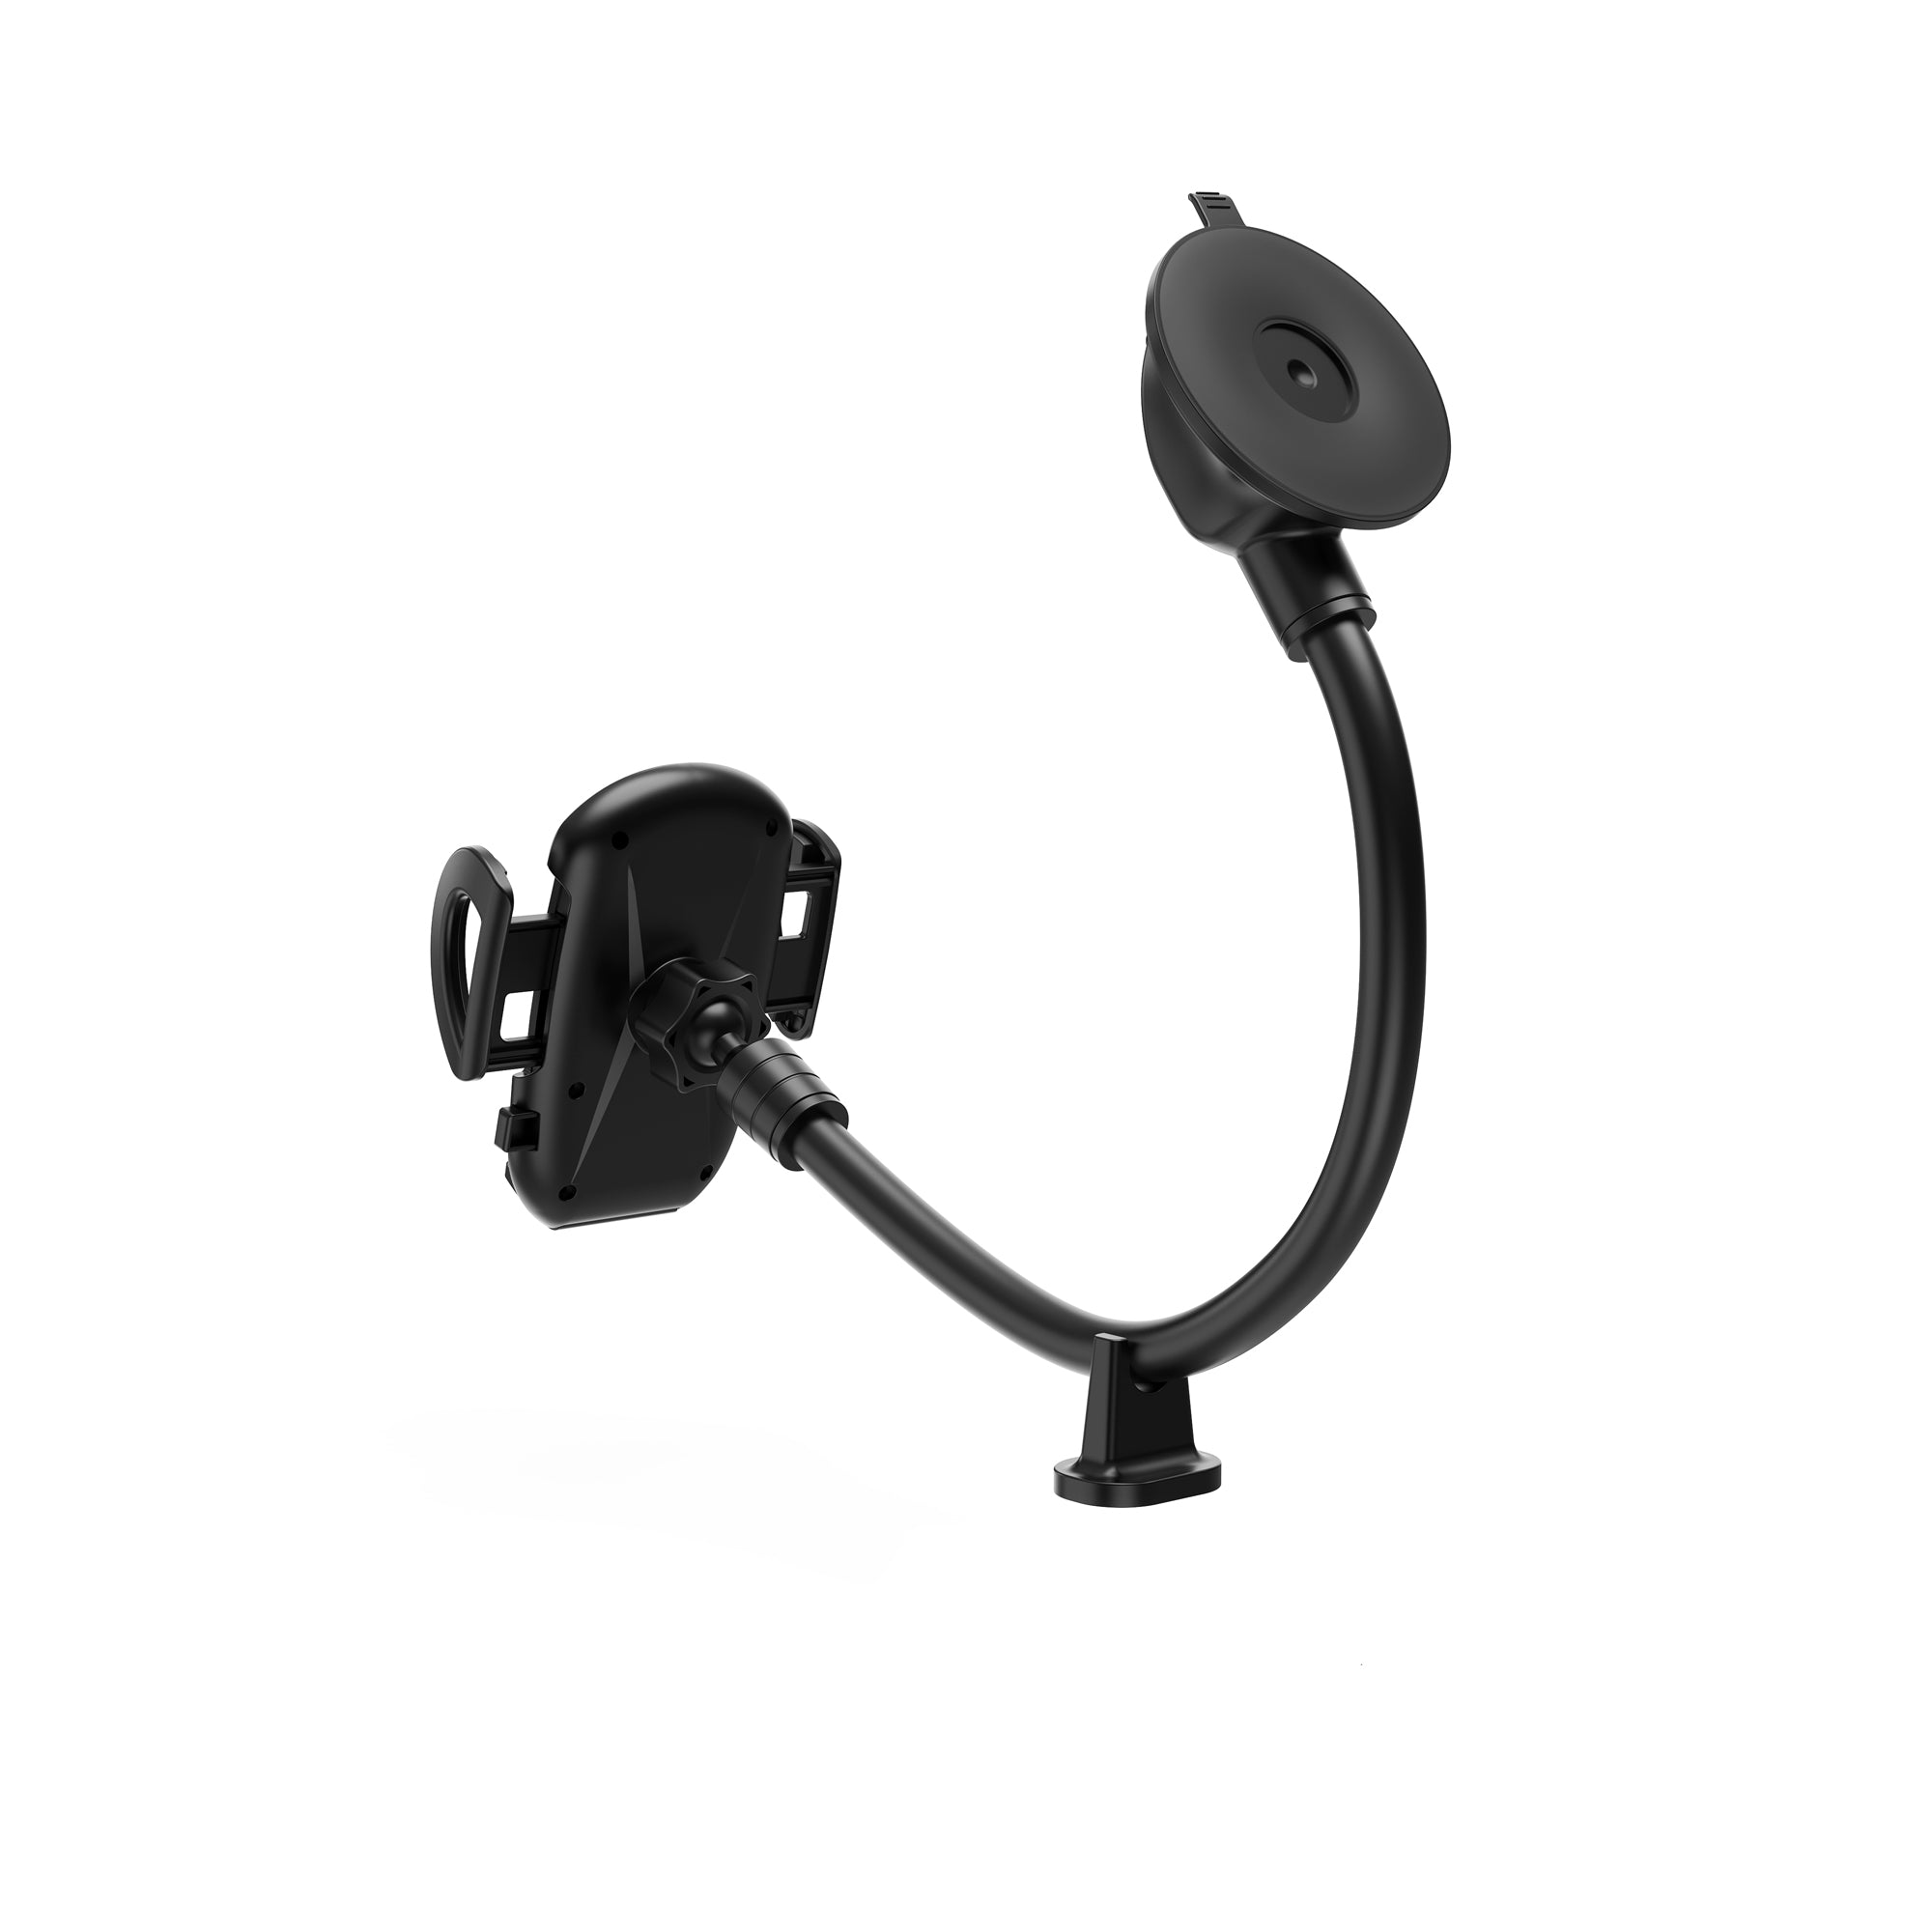 Wiwu CH016 Automatic Mechanism Flexible Spiral Suction Cup Design Car Phone Holder